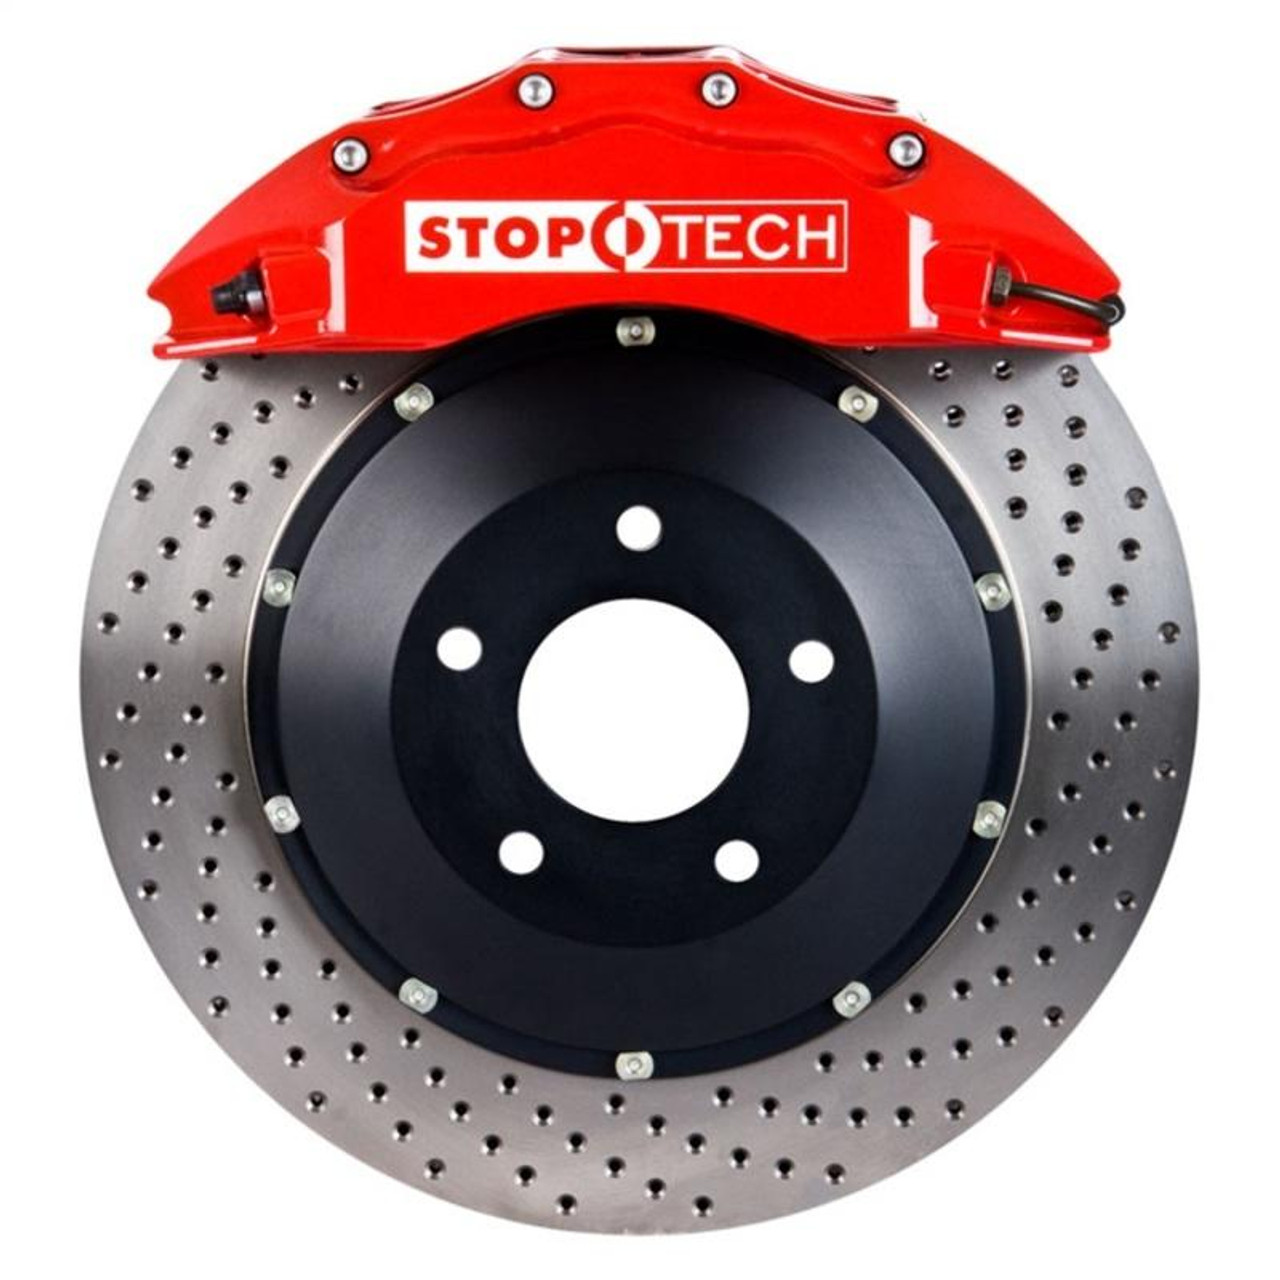 Stoptech StopTech 12-13 Volkswagen Golf ST-60 Red Calipers 355x32mm Drilled Rotors Front Big Brake Kit - 83.894.6700.72